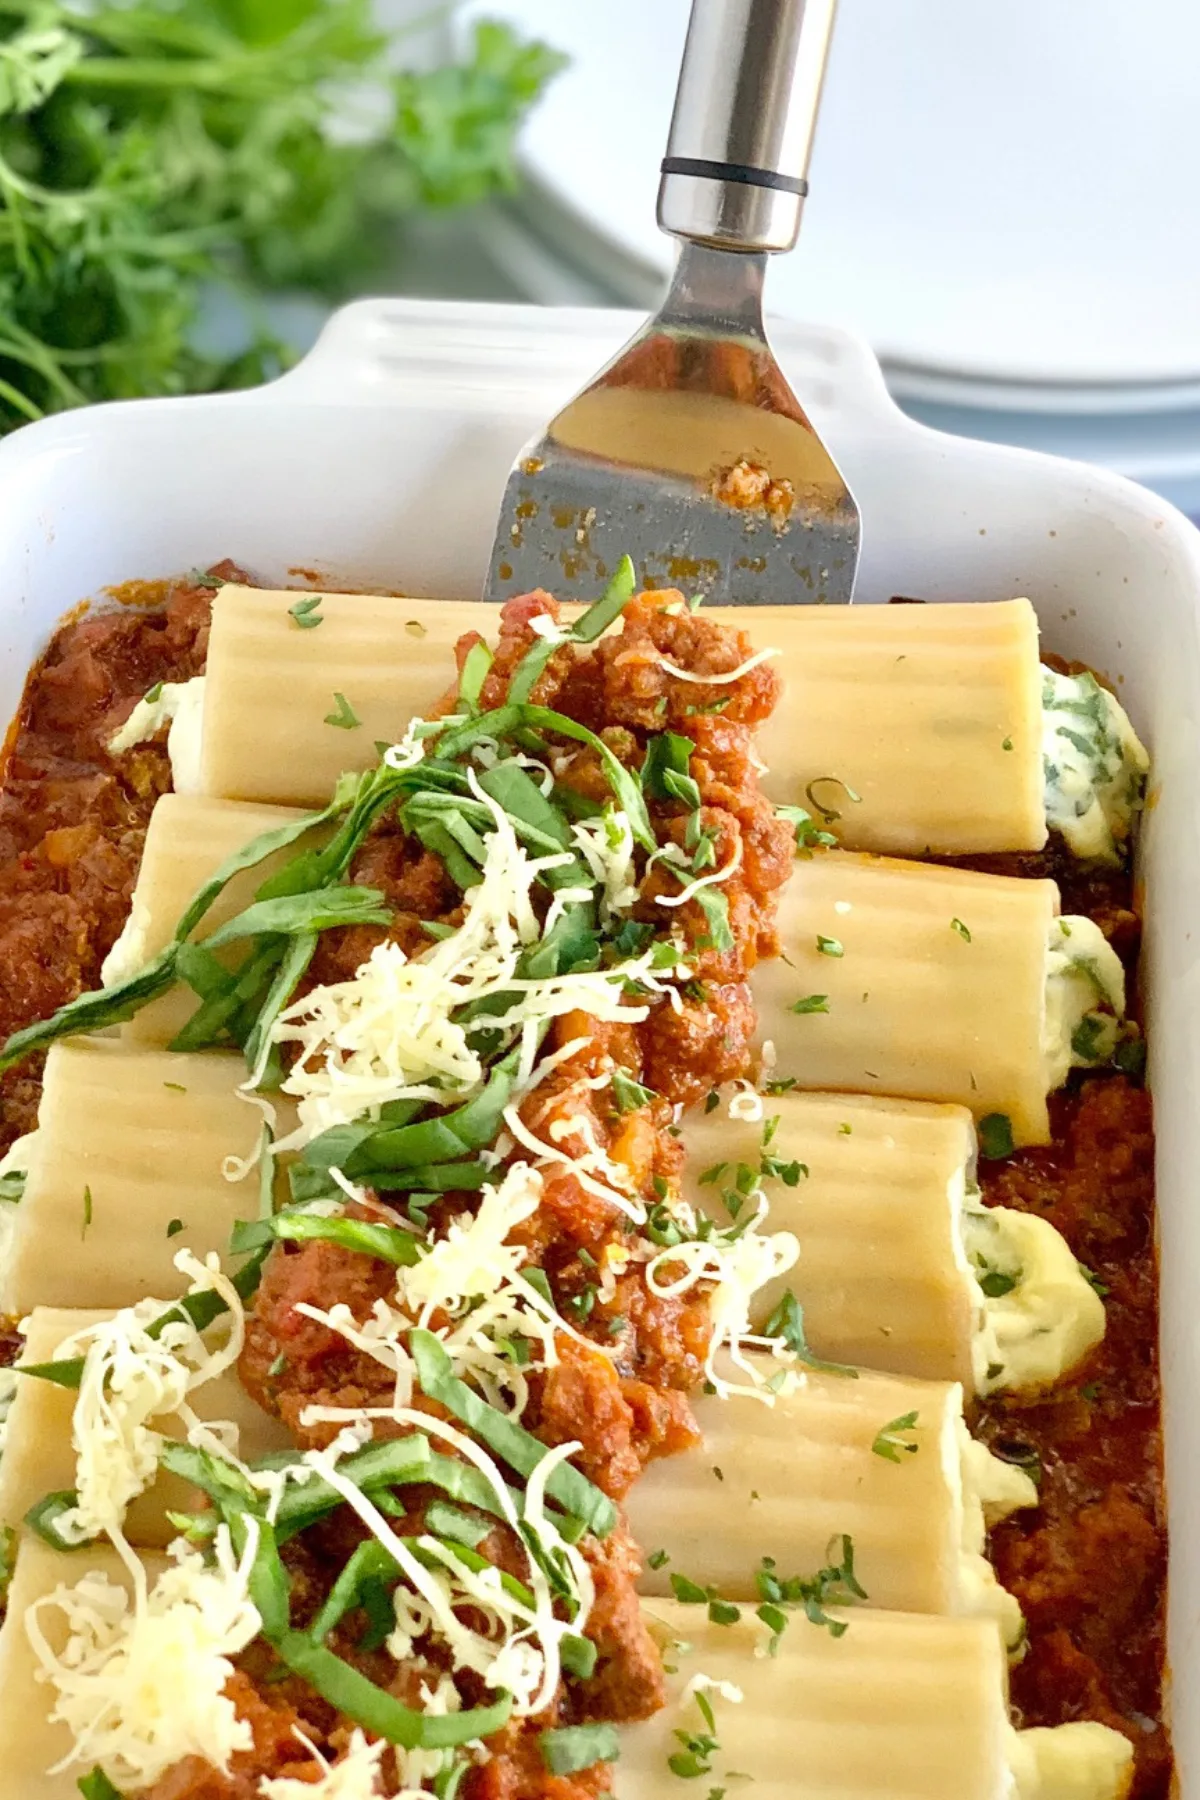 A large white baking dish filled with ground beef and marinara sauce then topped with round pasta shells filled with spinach, and a ricotta mixture. Then that's topped with more ground beef marinara sauce, dairy free cheese shreds, spinach, and fresh parsley with a serving spatula lifting up two of the manicotti out of the pan.